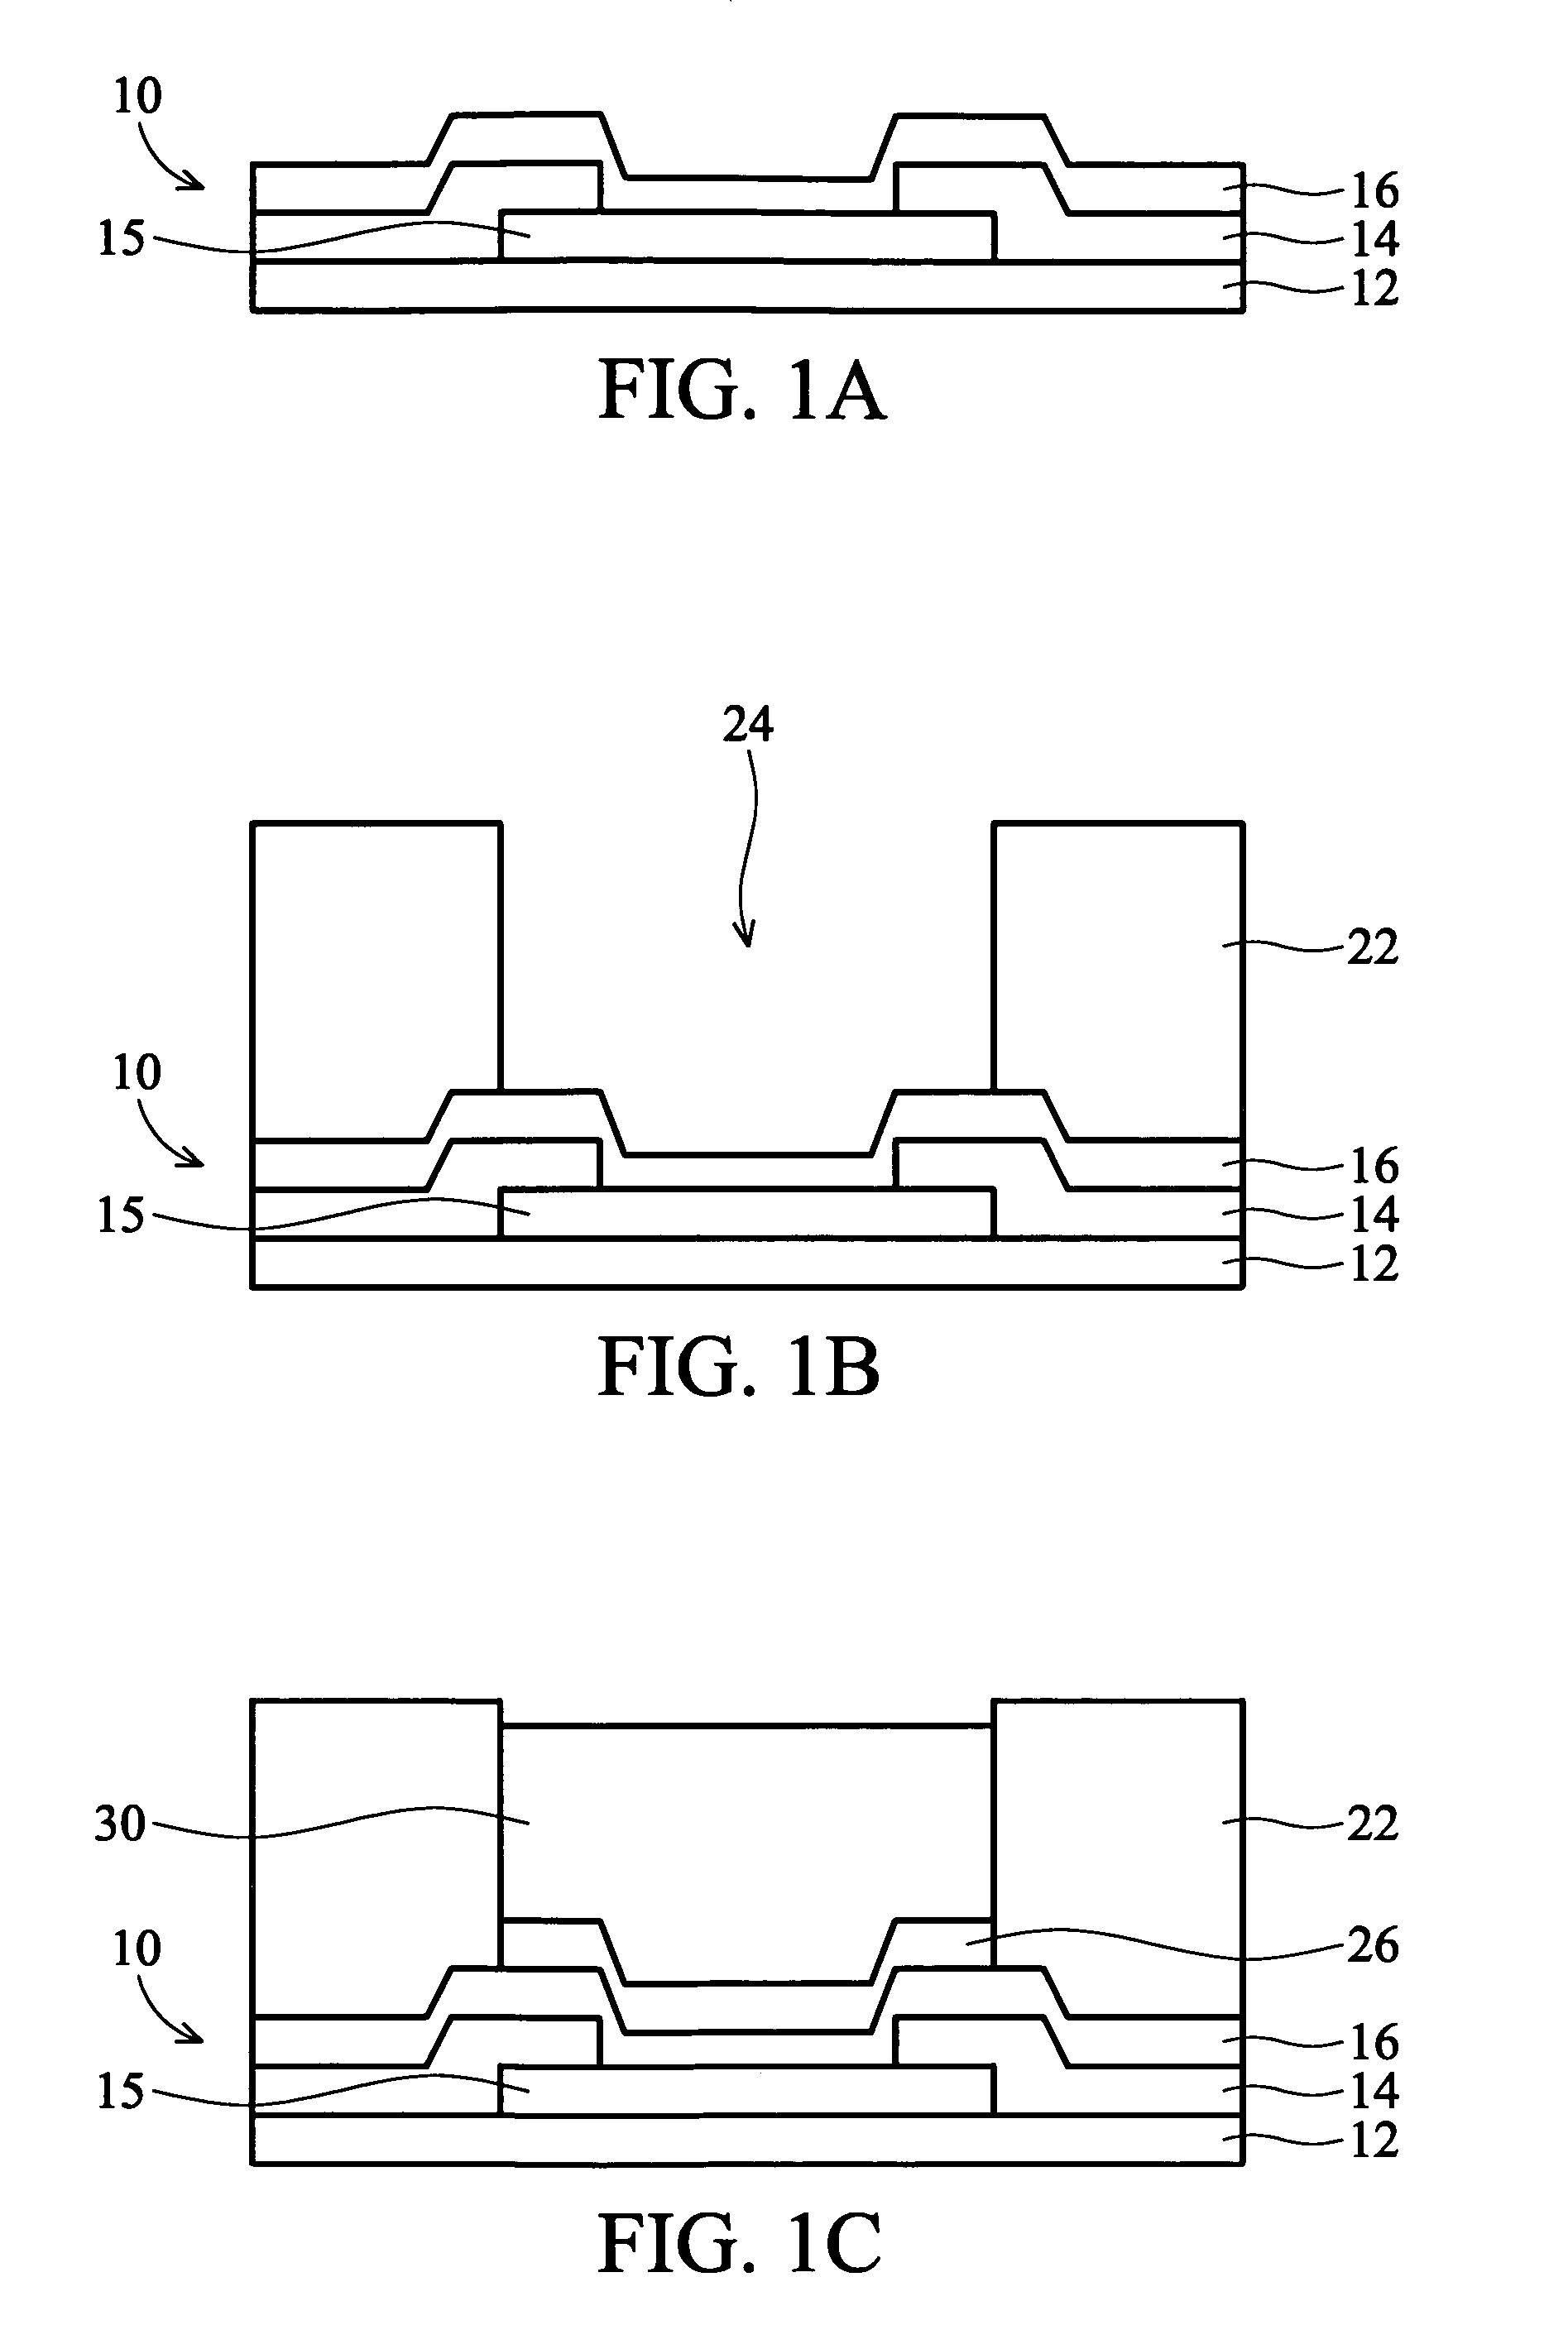 Method to increase bump height and achieve robust bump structure